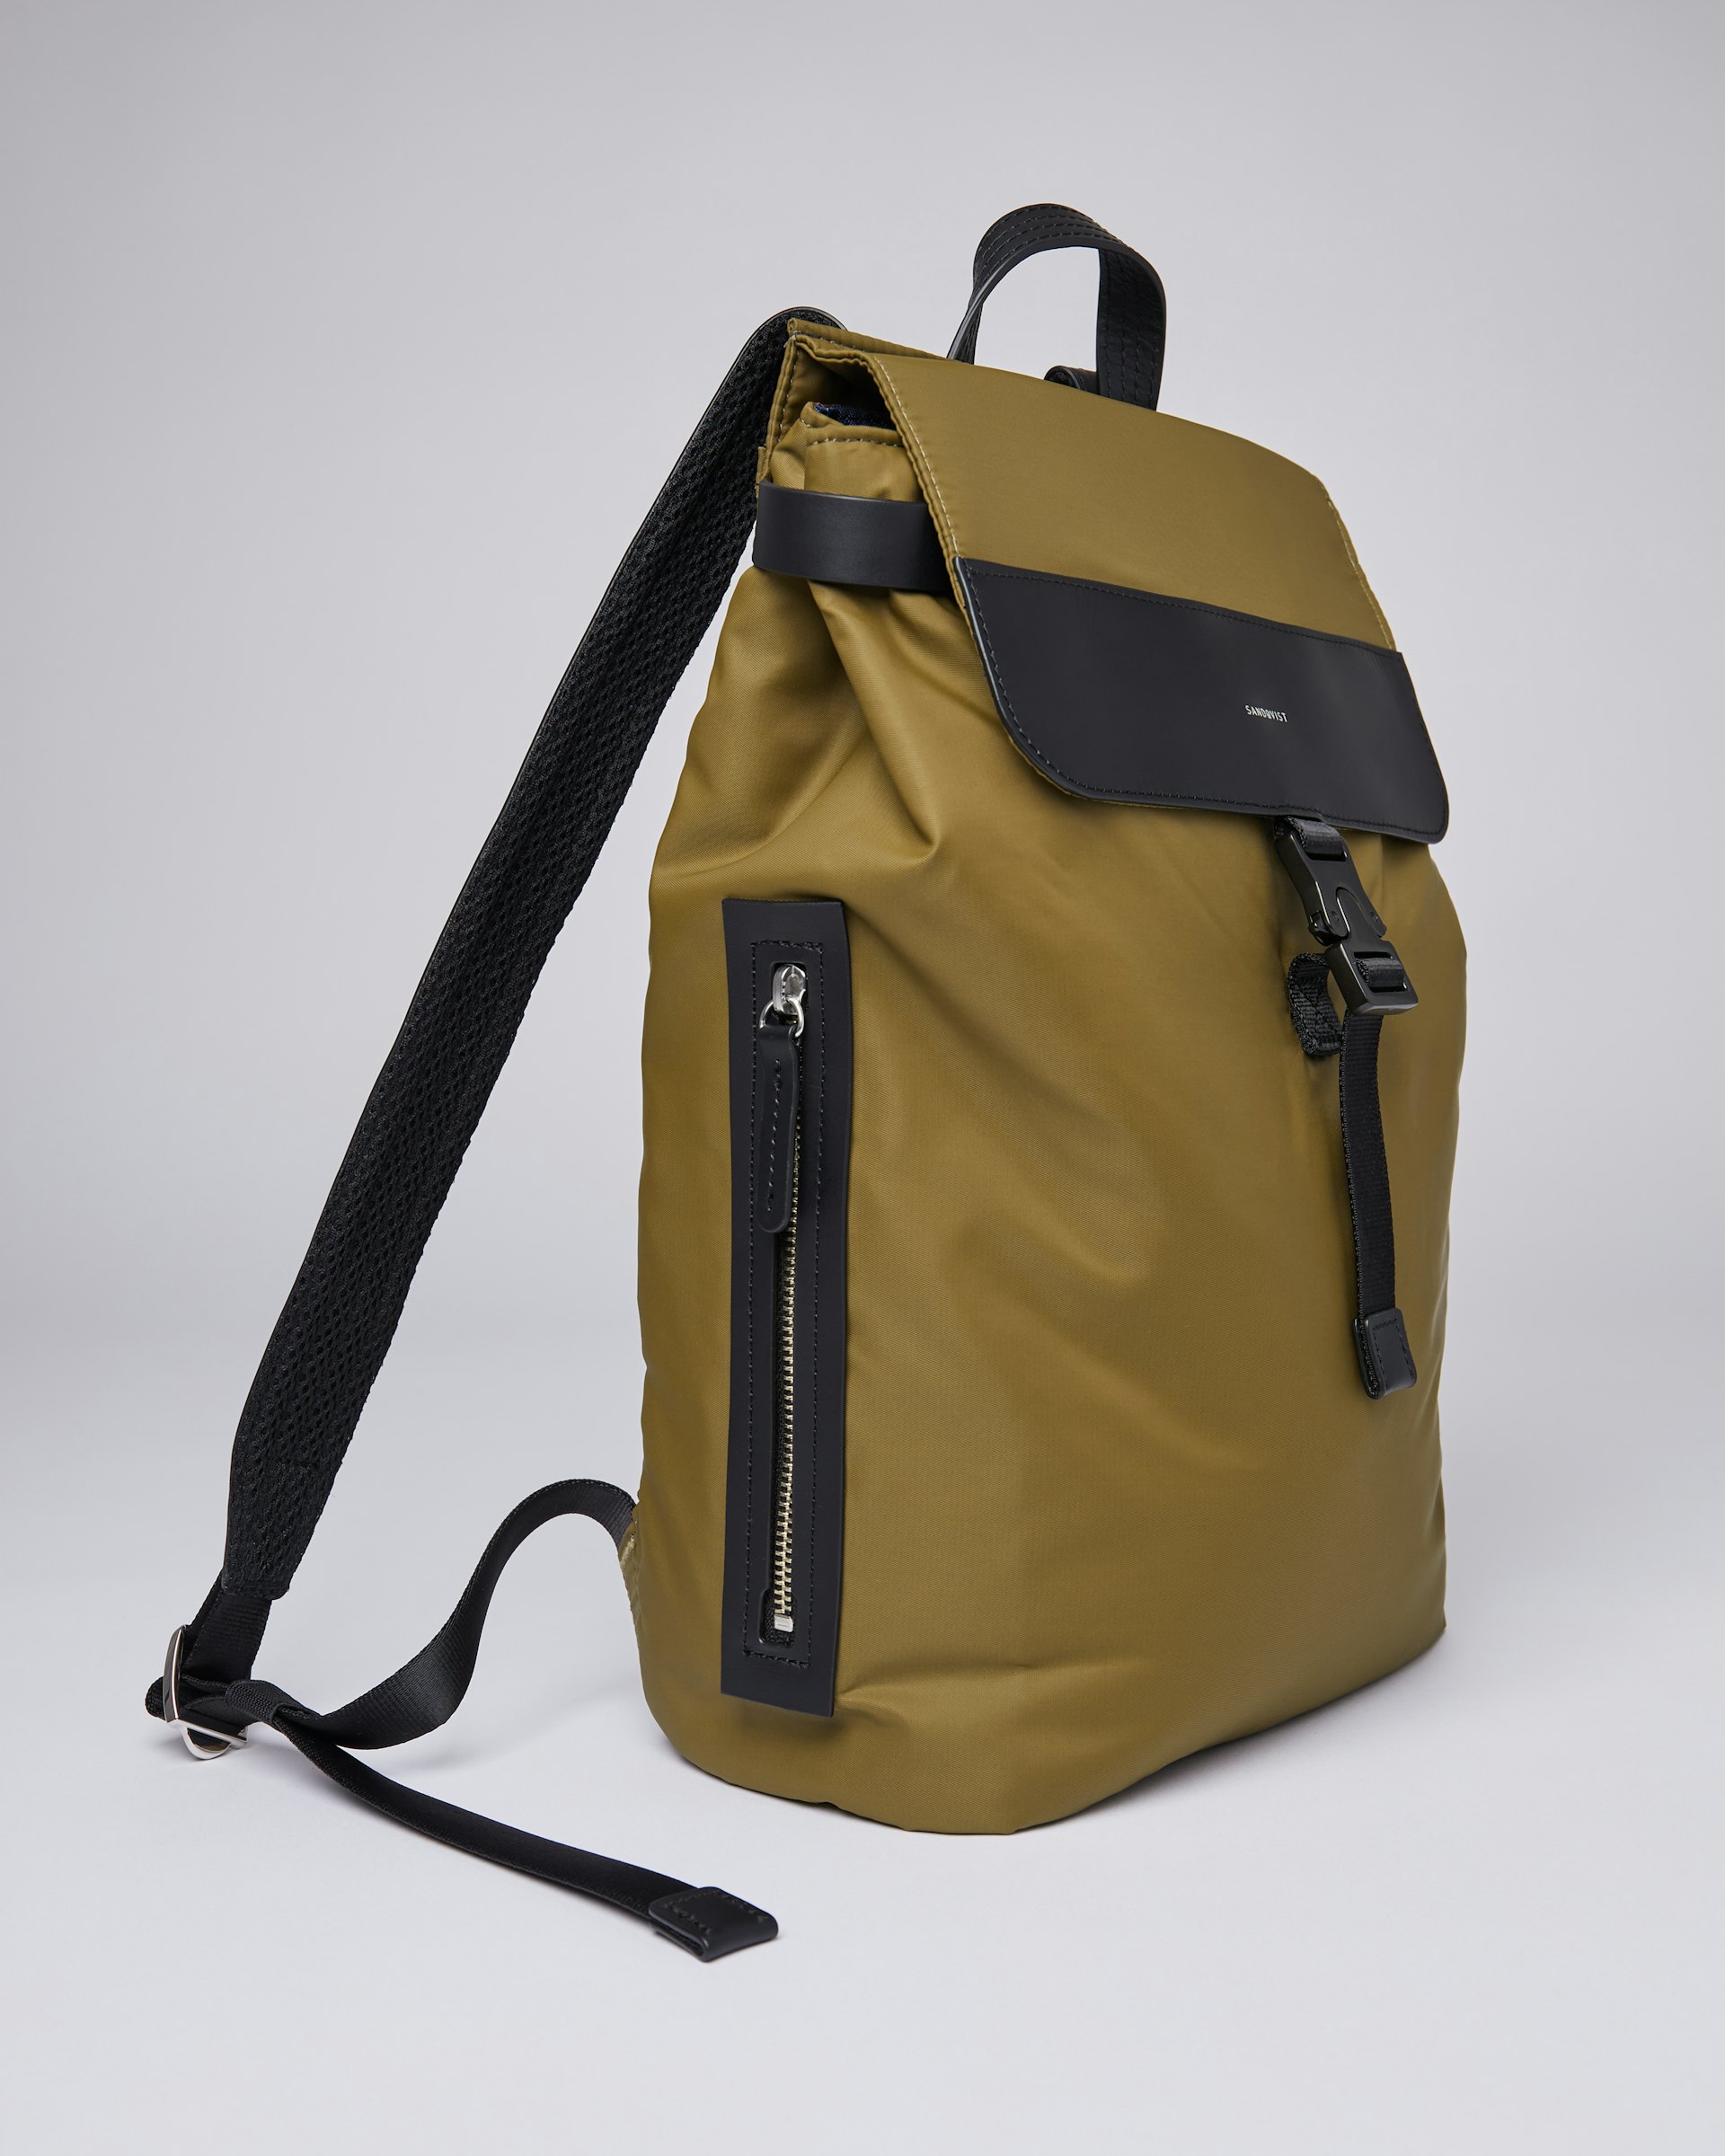 Alva Nylon belongs to the category Backpacks and is in color black & military olive (4 of 6)